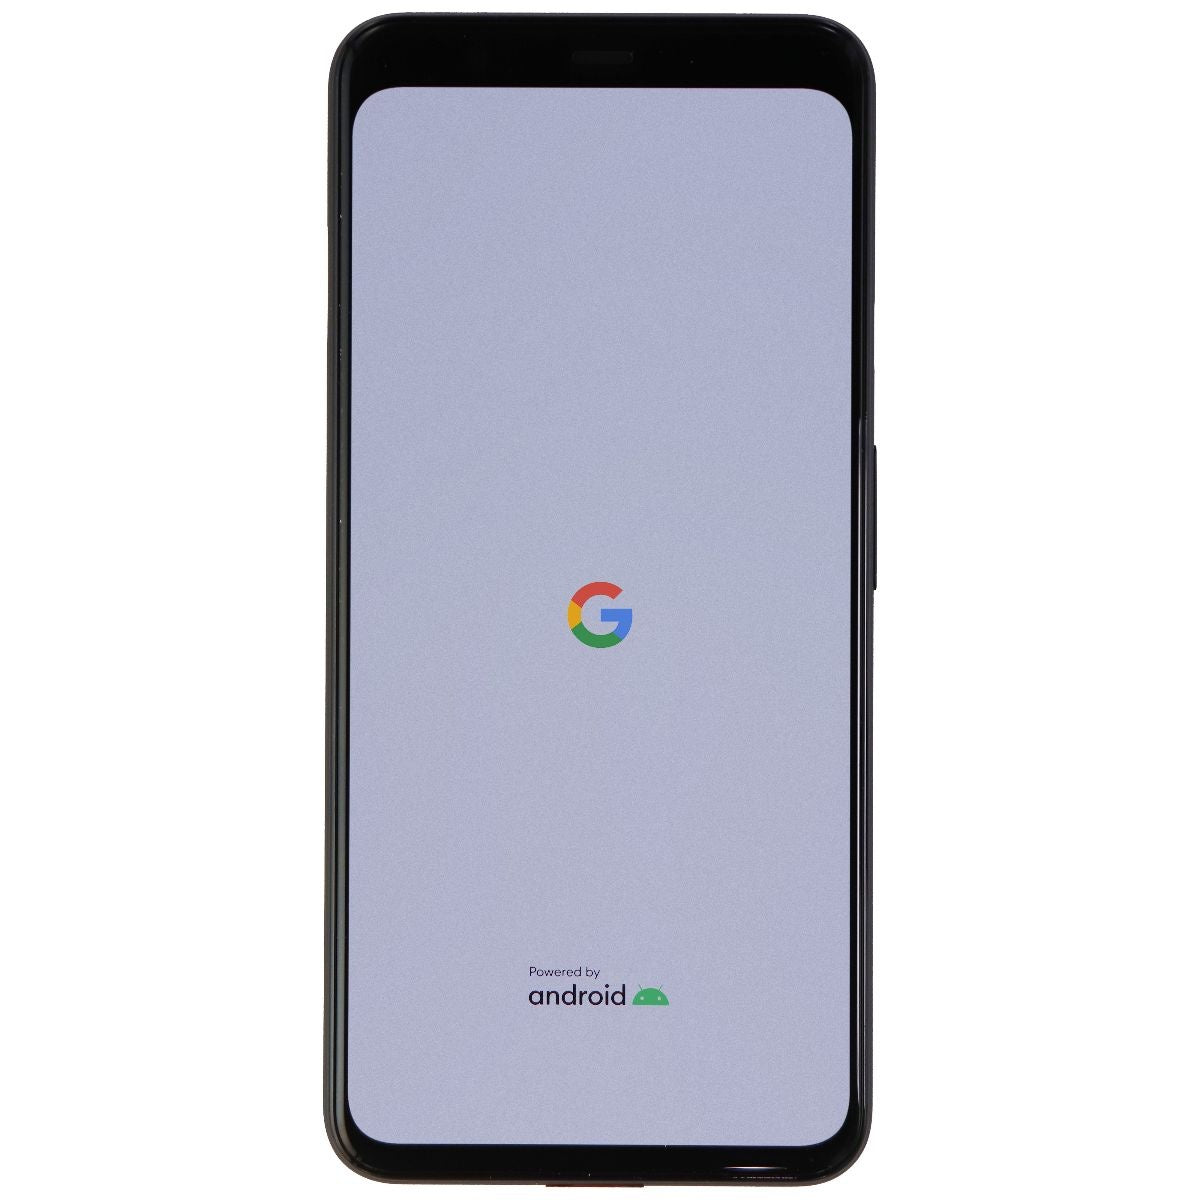 Google Pixel 4 XL (6.3-in) (G020J) UNLOCKED - 64GB / Just Black / BAD FACE ID Cell Phones & Smartphones Google    - Simple Cell Bulk Wholesale Pricing - USA Seller